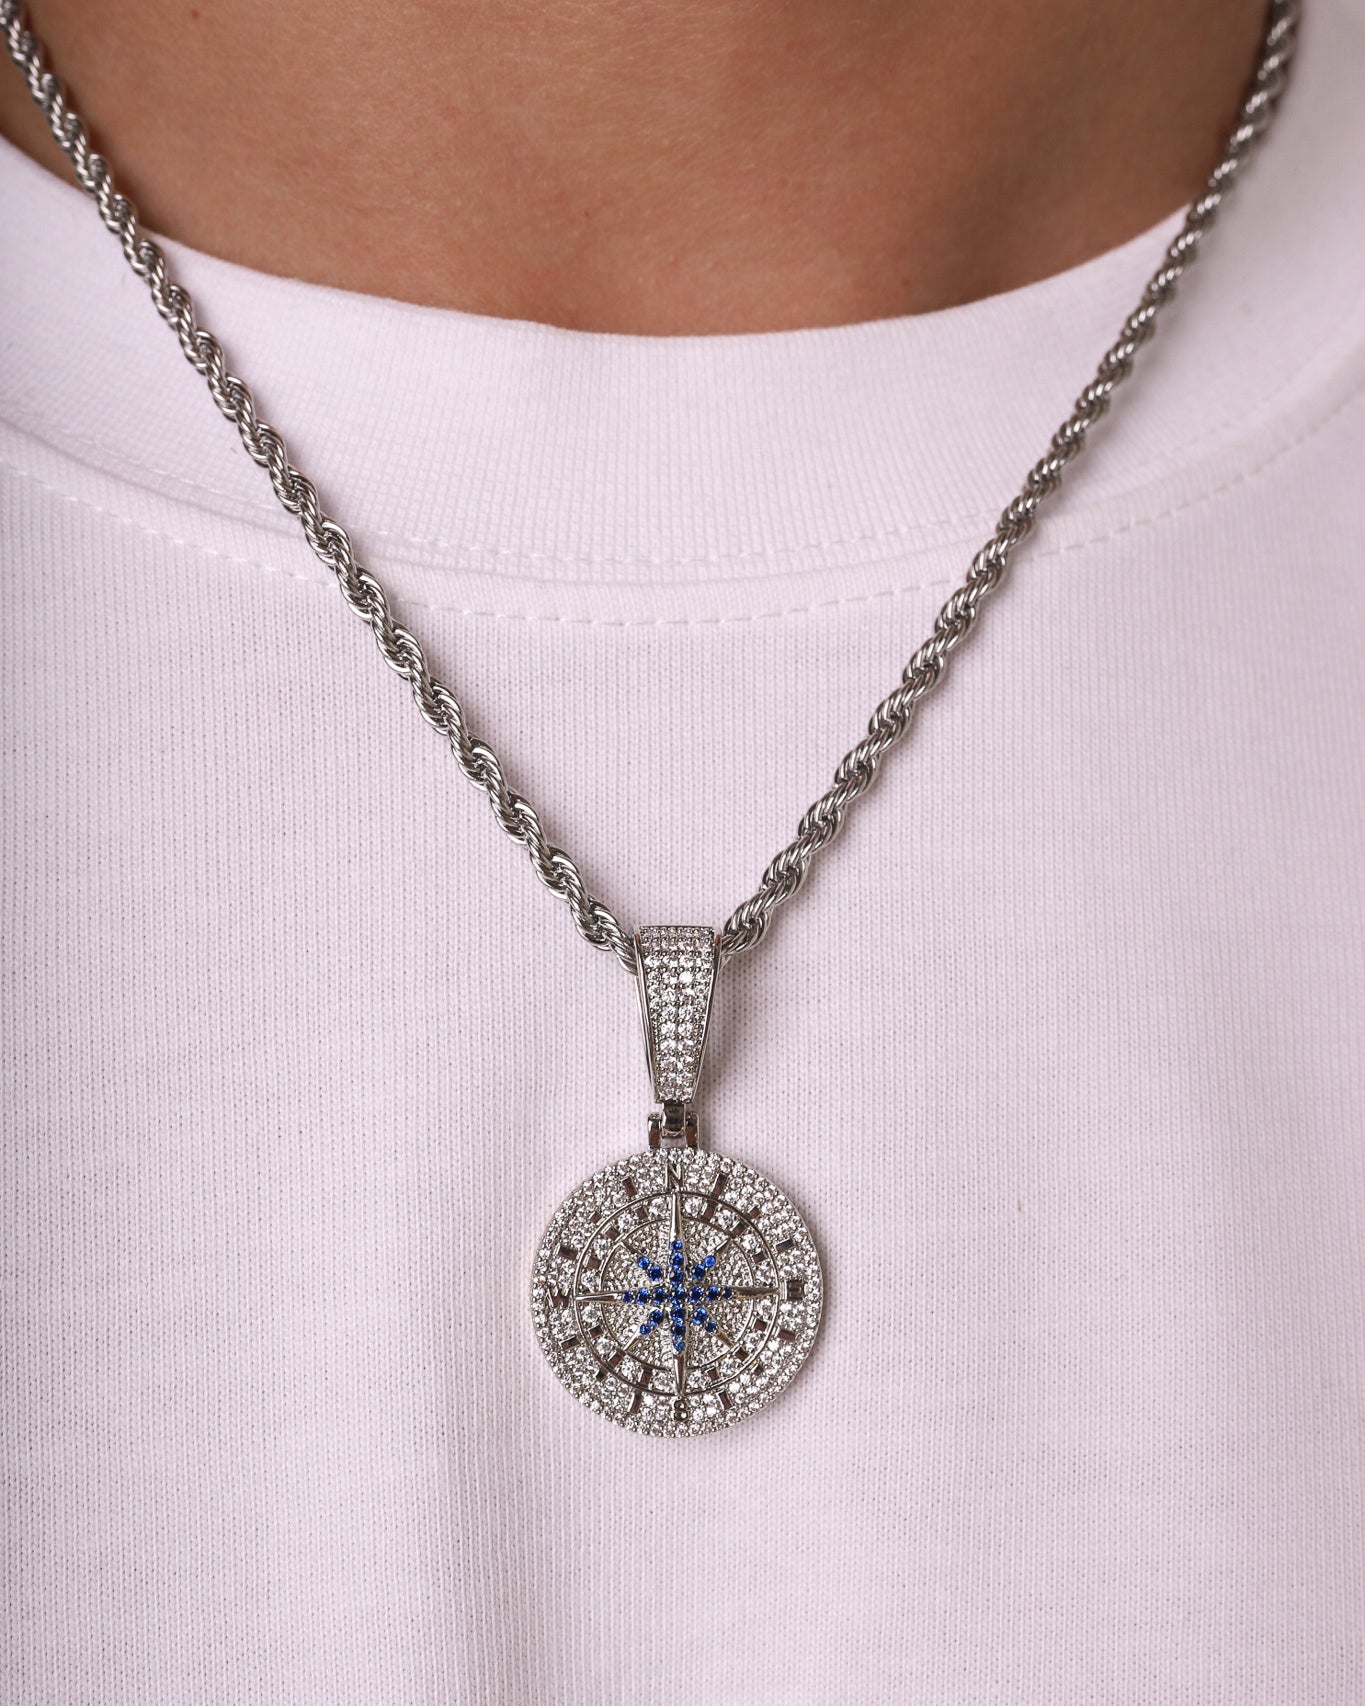 ICED COMPASS PENDANT. - WHITE GOLD